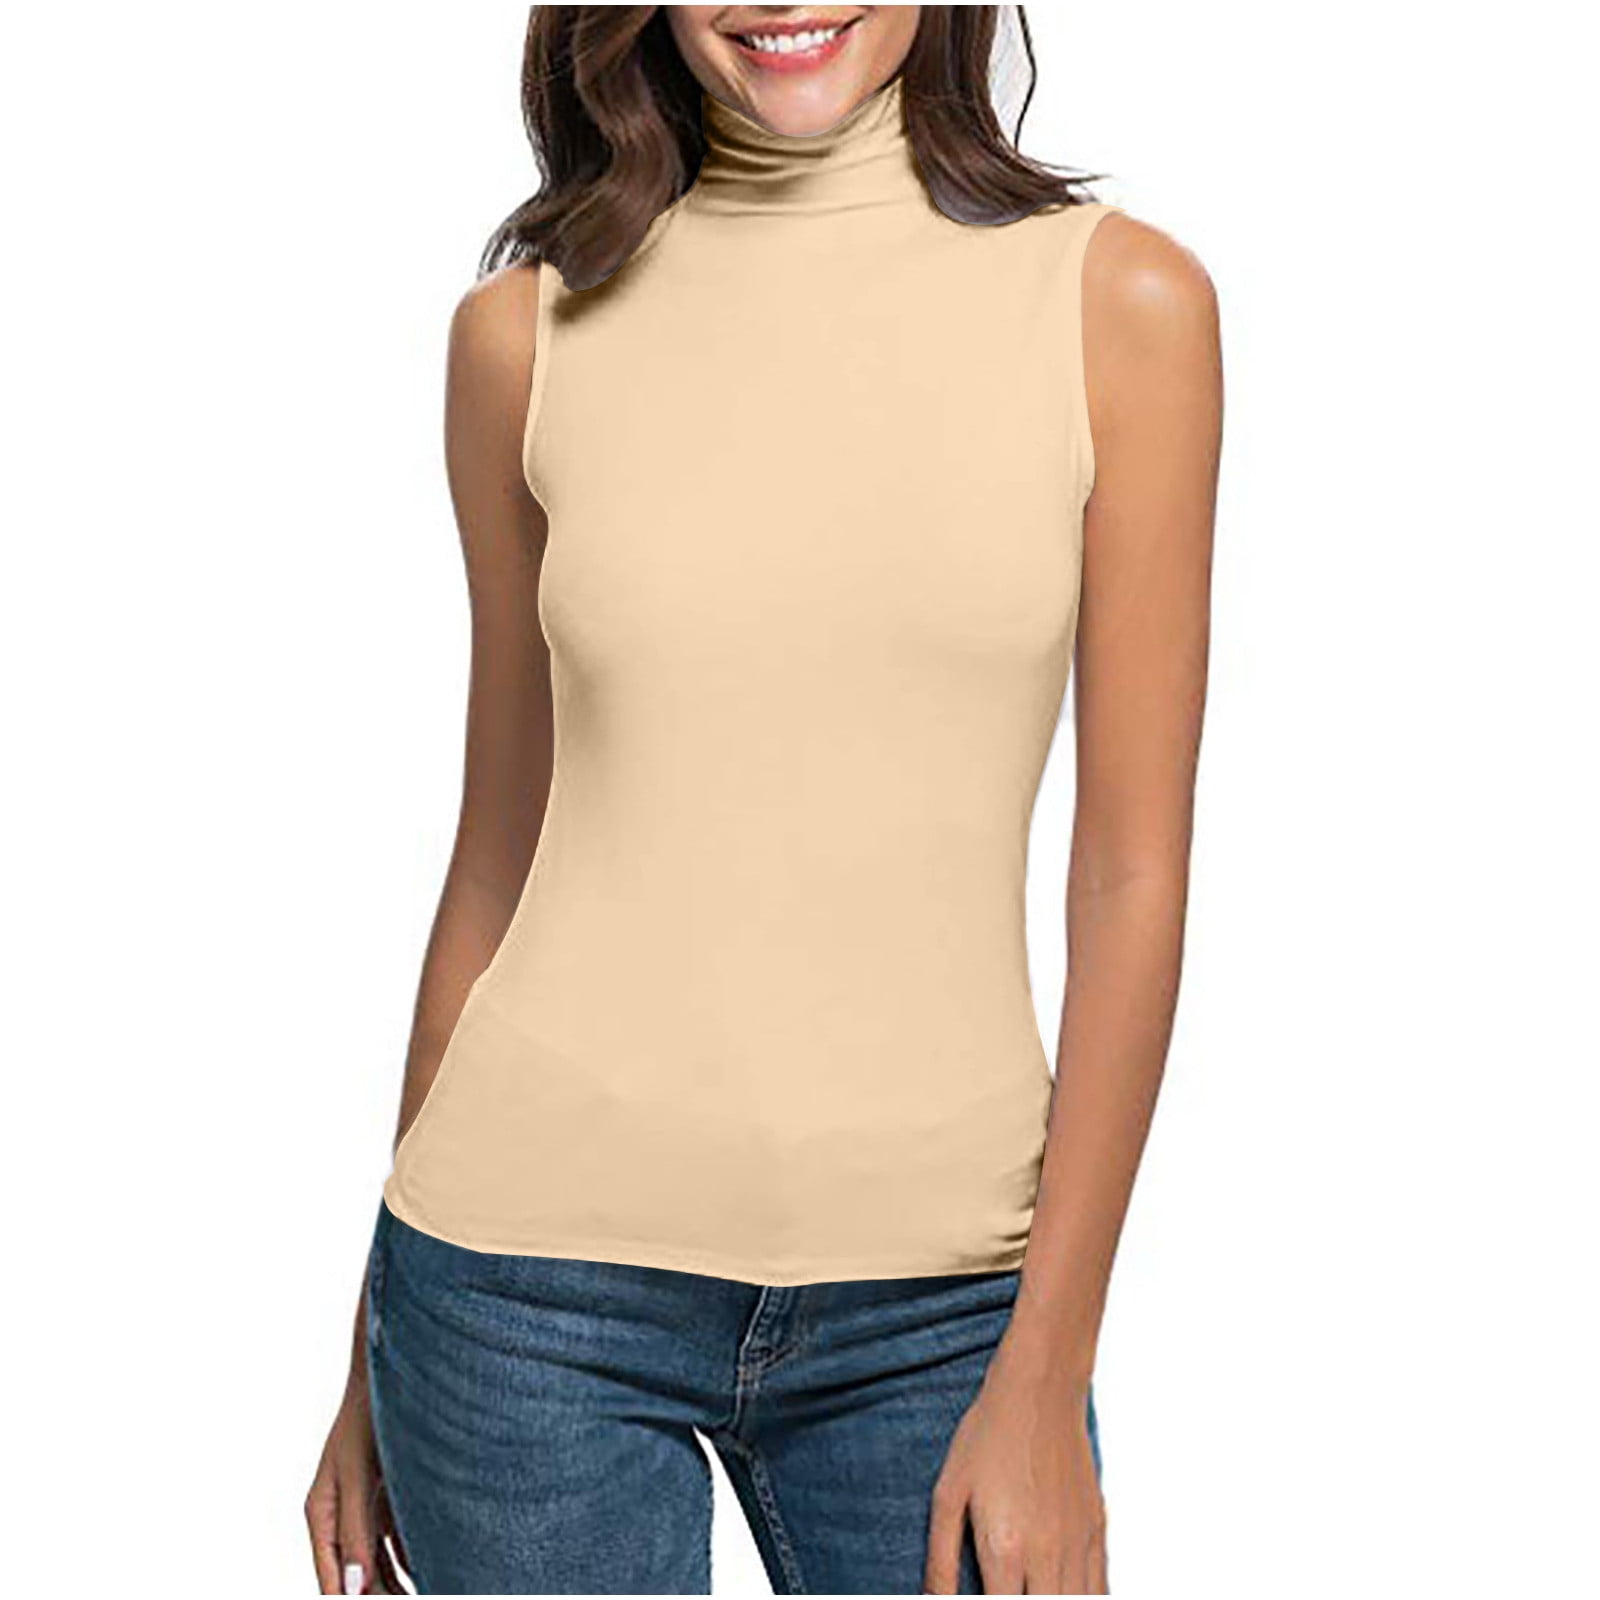 Lolmot Mock Neck Tops for Women Fashion Casual Solid Color Sleeveless ...